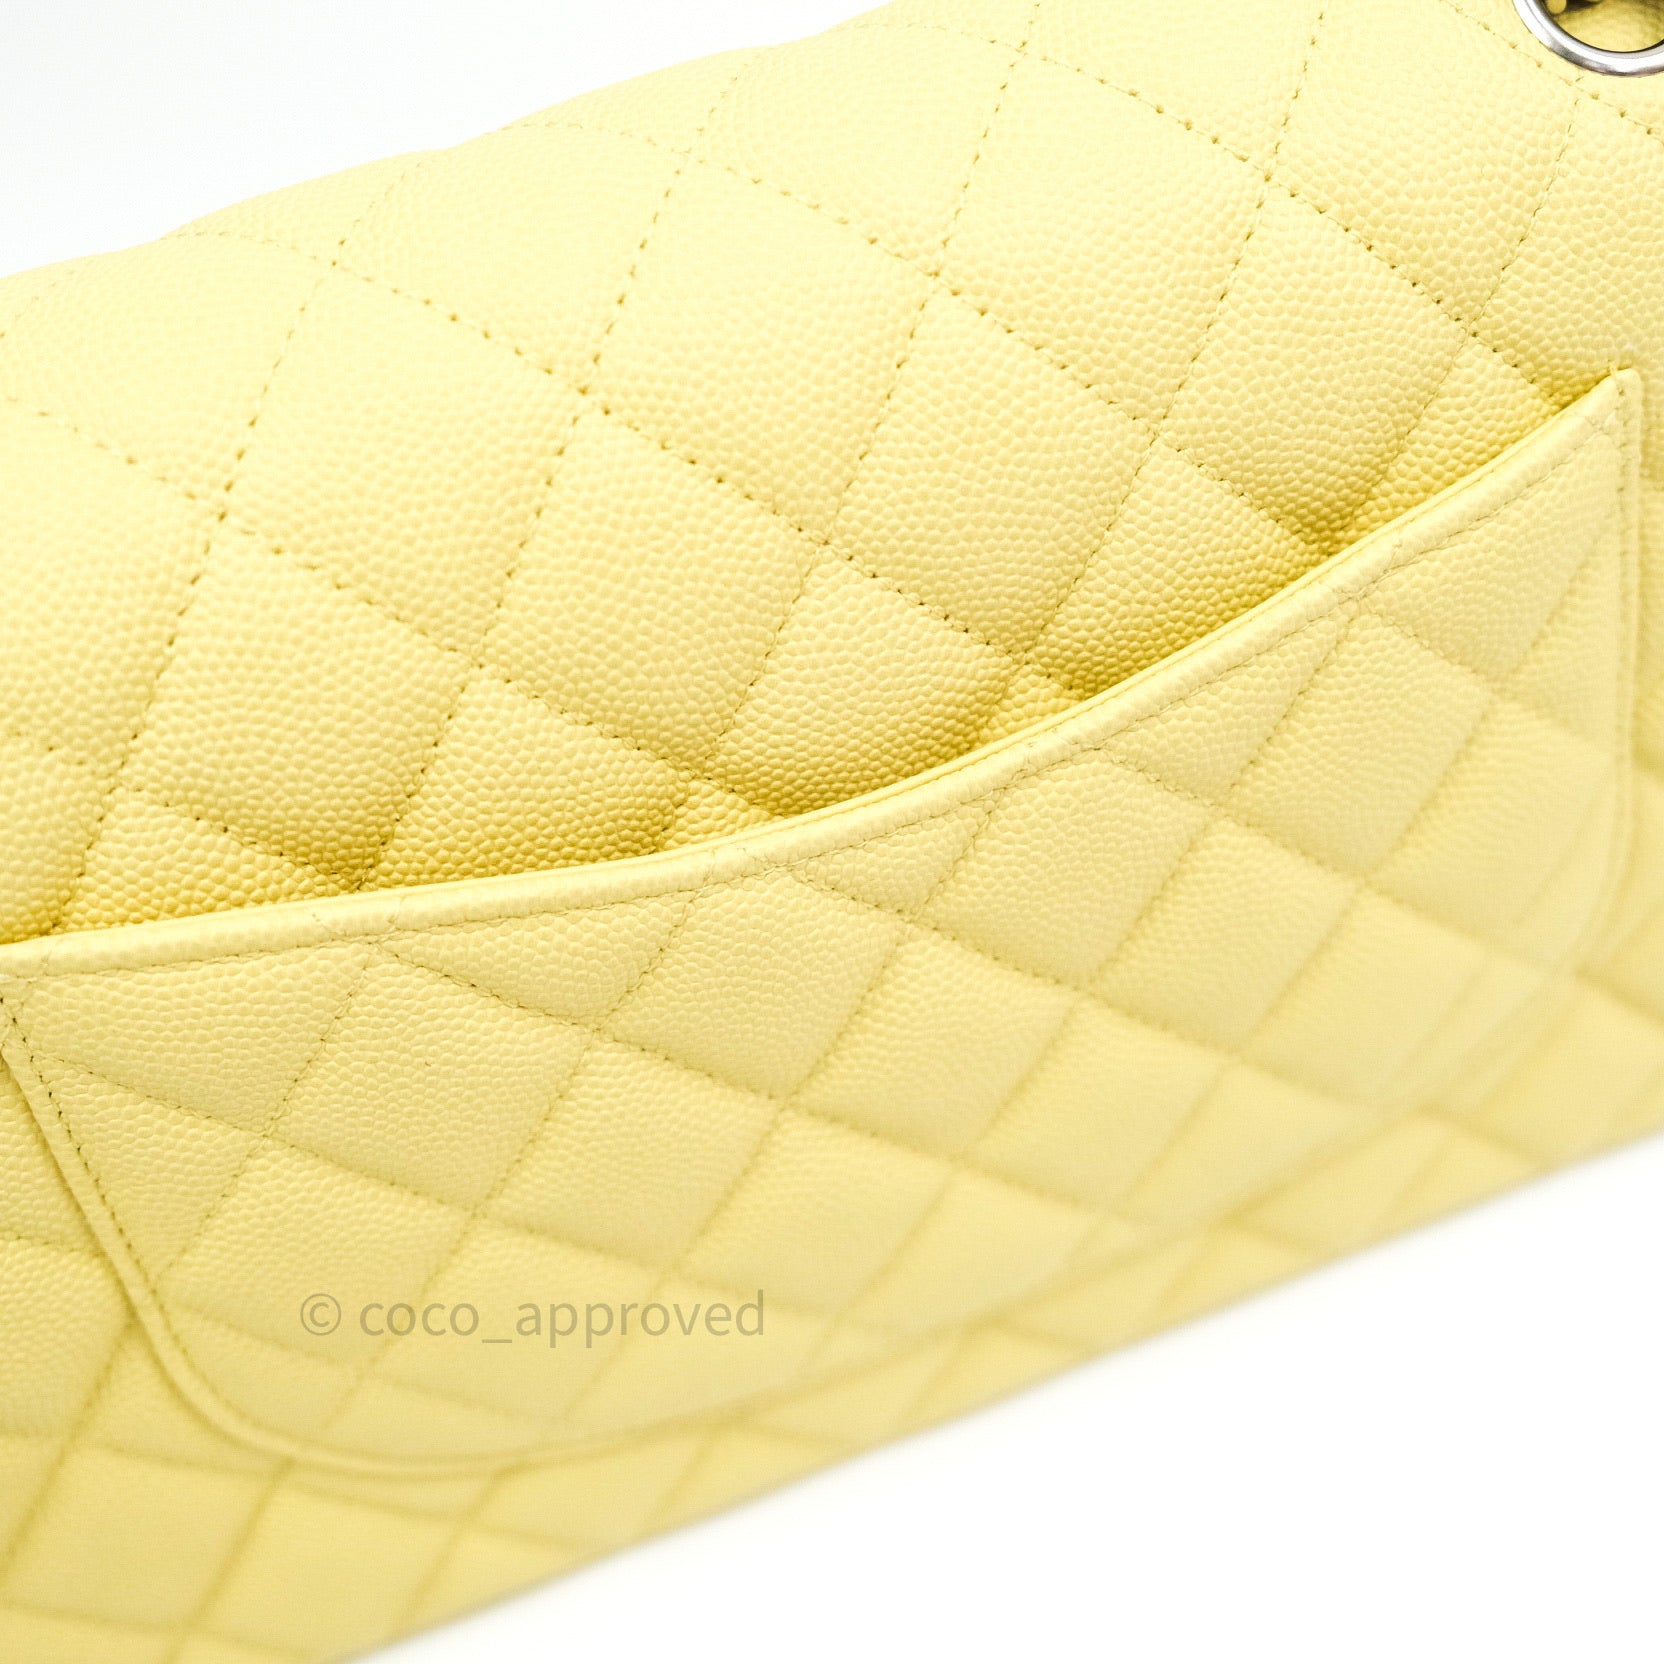 Chanel Light Yellow Quilted Caviar Medium Classic Double Flap Bag